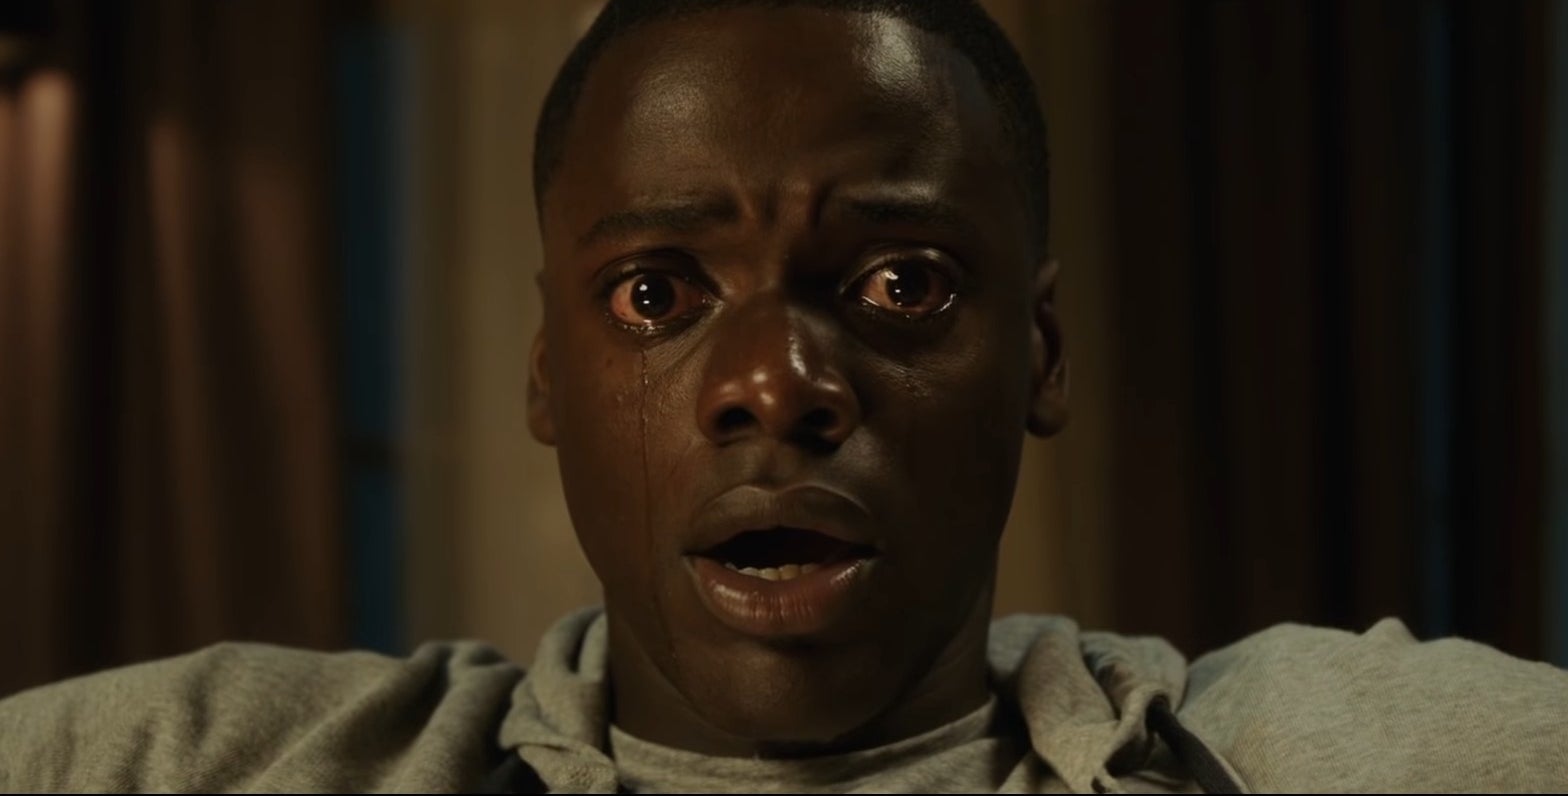 Chris crying while hypnotized in &quot;Get Out&quot;